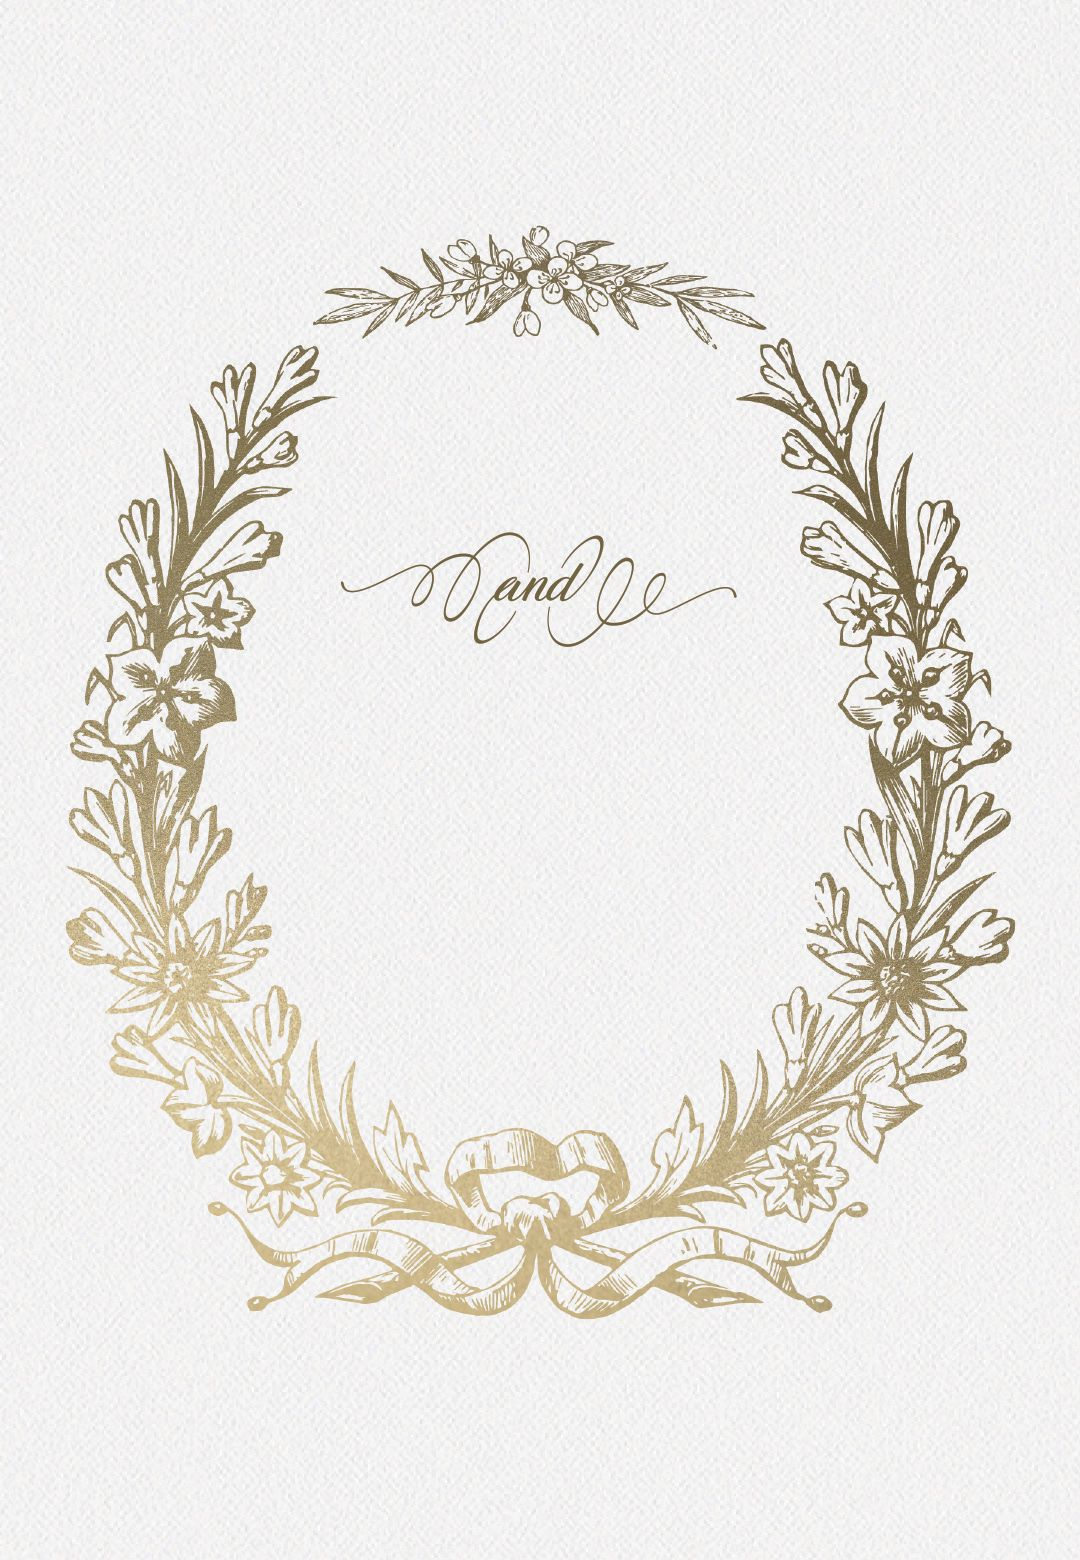 Golden Wreath Wedding Invitation Template Free Greetings intended for proportions 1080 X 1560